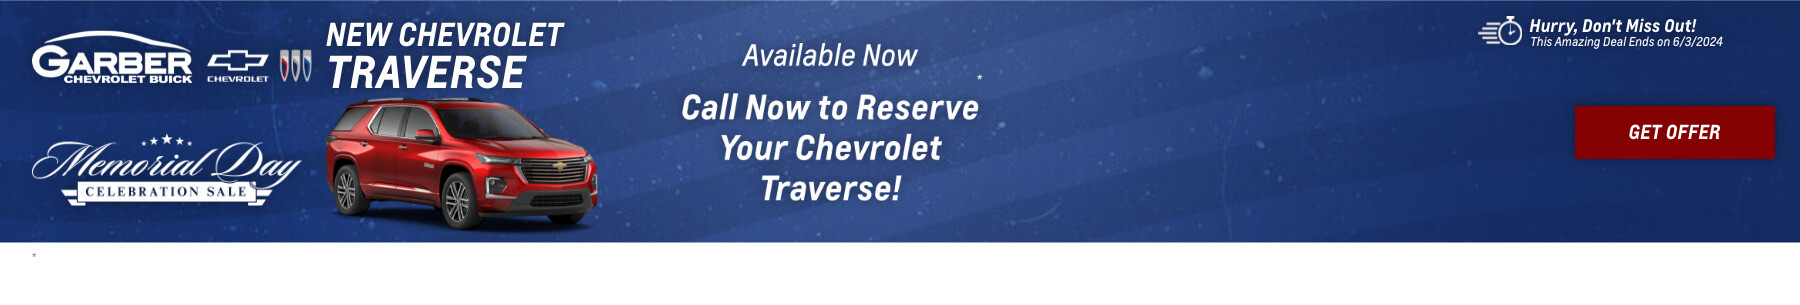 New Chevrolet Traverse Current Deals and Offers in Chesaning, MI